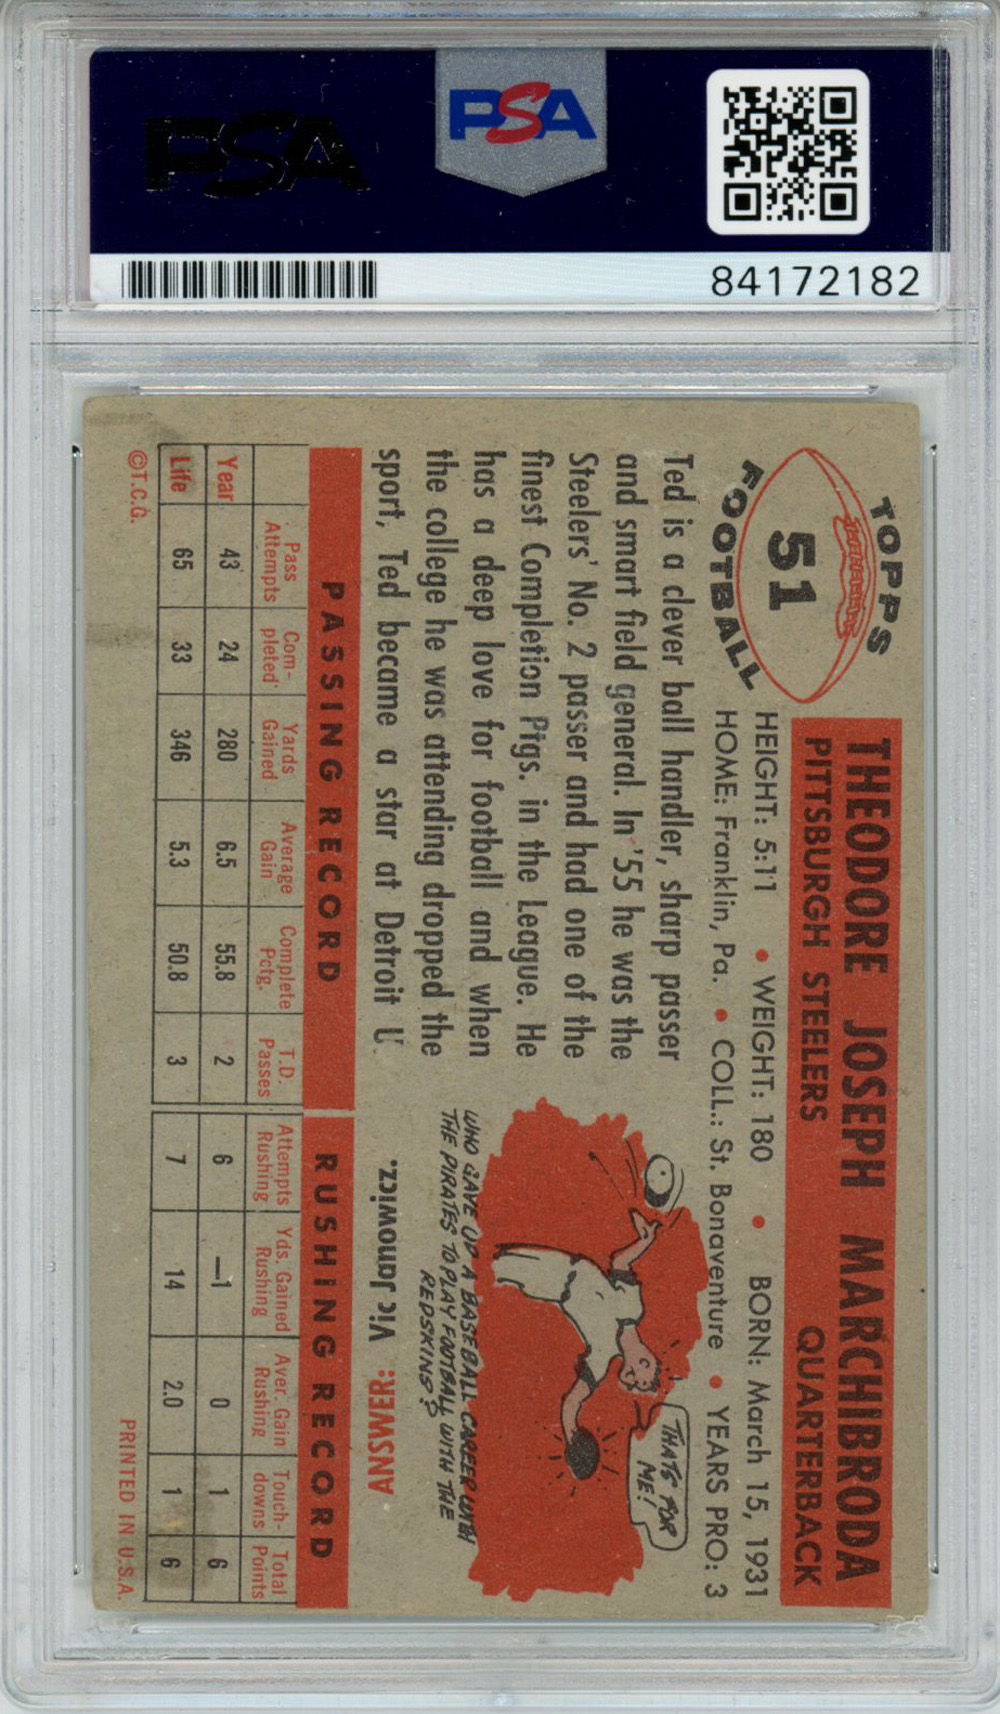 Ted Marchibroda Autographed 1956 Topps #51 Trading Card PSA Slab